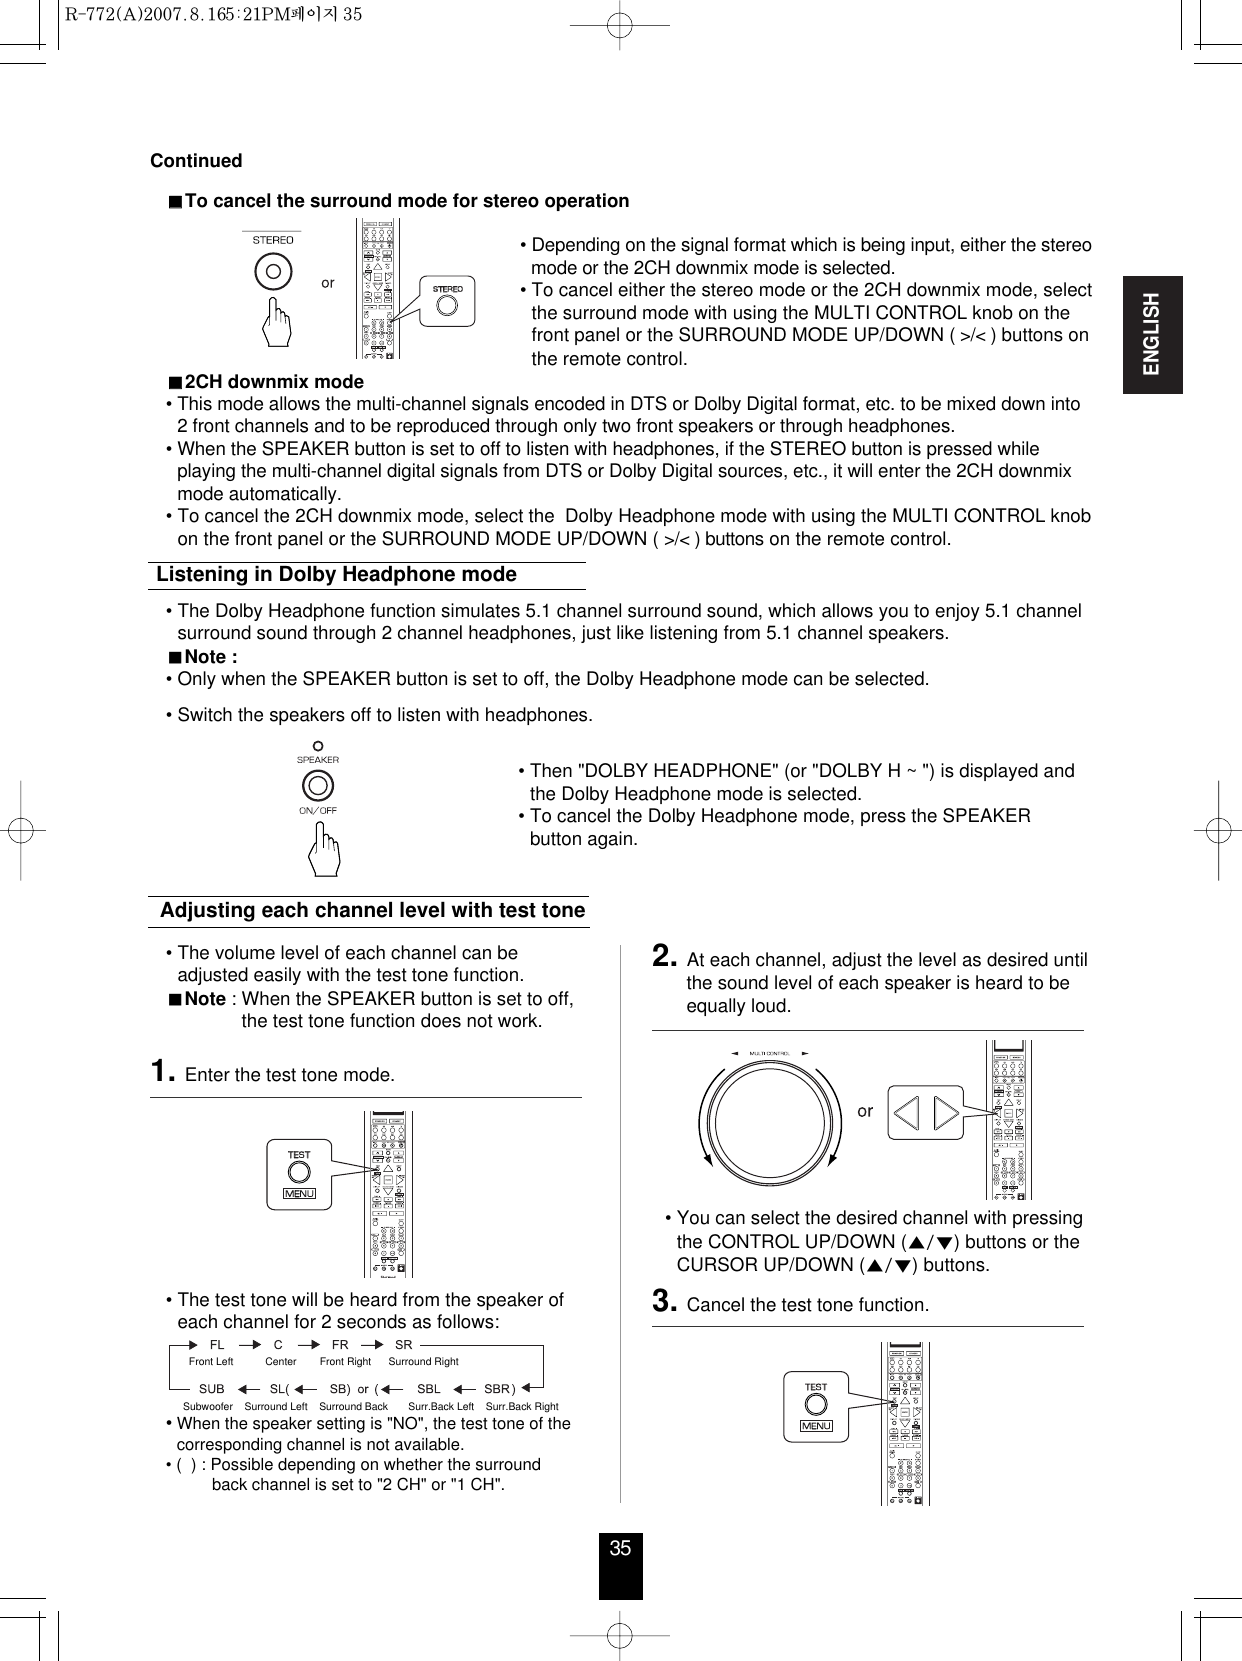 ENGLISH35ContinuedTo cancel the surround mode for stereo operation• Depending on the signal format which is being input, either the stereomode or the 2CH downmix mode is selected.• To cancel either the stereo mode or the 2CH downmix mode, selectthe surround mode with using the MULTI CONTROL knob on thefront panel or the SURROUND MODE UP/DOWN ( &gt;/&lt; ) buttons onthe remote control.2CH downmix mode• This mode allows the multi-channel signals encoded in DTS or Dolby Digital format, etc. to be mixed down into2 front channels and to be reproduced through only two front speakers or through headphones.• When the SPEAKER button is set to off to listen with headphones, if the STEREO button is pressed whileplaying the multi-channel digital signals from DTS or Dolby Digital sources, etc., it will enter the 2CH downmixmode automatically.• To cancel the 2CH downmix mode, select the  Dolby Headphone mode with using the MULTI CONTROL knobon the front panel or the SURROUND MODE UP/DOWN ( &gt;/&lt; ) buttons on the remote control.• The Dolby Headphone function simulates 5.1 channel surround sound, which allows you to enjoy 5.1 channelsurround sound through 2 channel headphones, just like listening from 5.1 channel speakers.Note :• Only when the SPEAKER button is set to off, the Dolby Headphone mode can be selected.   • Switch the speakers off to listen with headphones.Listening in Dolby Headphone mode• The volume level of each channel can beadjusted easily with the test tone function.Note : When the SPEAKER button is set to off,the test tone function does not work.Adjusting each channel level with test tone• The test tone will be heard from the speaker ofeach channel for 2 seconds as follows:Front Left           Center        Front Right      Surround Right    Subwoofer    Surround Left    Surround Back       Surr.Back Left    Surr.Back Right•When the speaker setting is &quot;NO&quot;, the test tone of thecorresponding channel is not available.• (  ) : Possible depending on whether the surround back channel is set to &quot;2 CH&quot; or &quot;1 CH&quot;.• You can select the desired channel with pressingthe CONTROL UP/DOWN () buttons or theCURSOR UP/DOWN () buttons.1. Enter the test tone mode.3. Cancel the test tone function.2. At each channel, adjust the level as desired untilthe sound level of each speaker is heard to beequally loud.• Then &quot;DOLBY HEADPHONE&quot; (or &quot;DOLBY H ~ &quot;) is displayed andthe Dolby Headphone mode is selected.• To cancel the Dolby Headphone mode, press the SPEAKERbutton again.R-772(A)  2007.8.16  5:21 PM  페이지 35